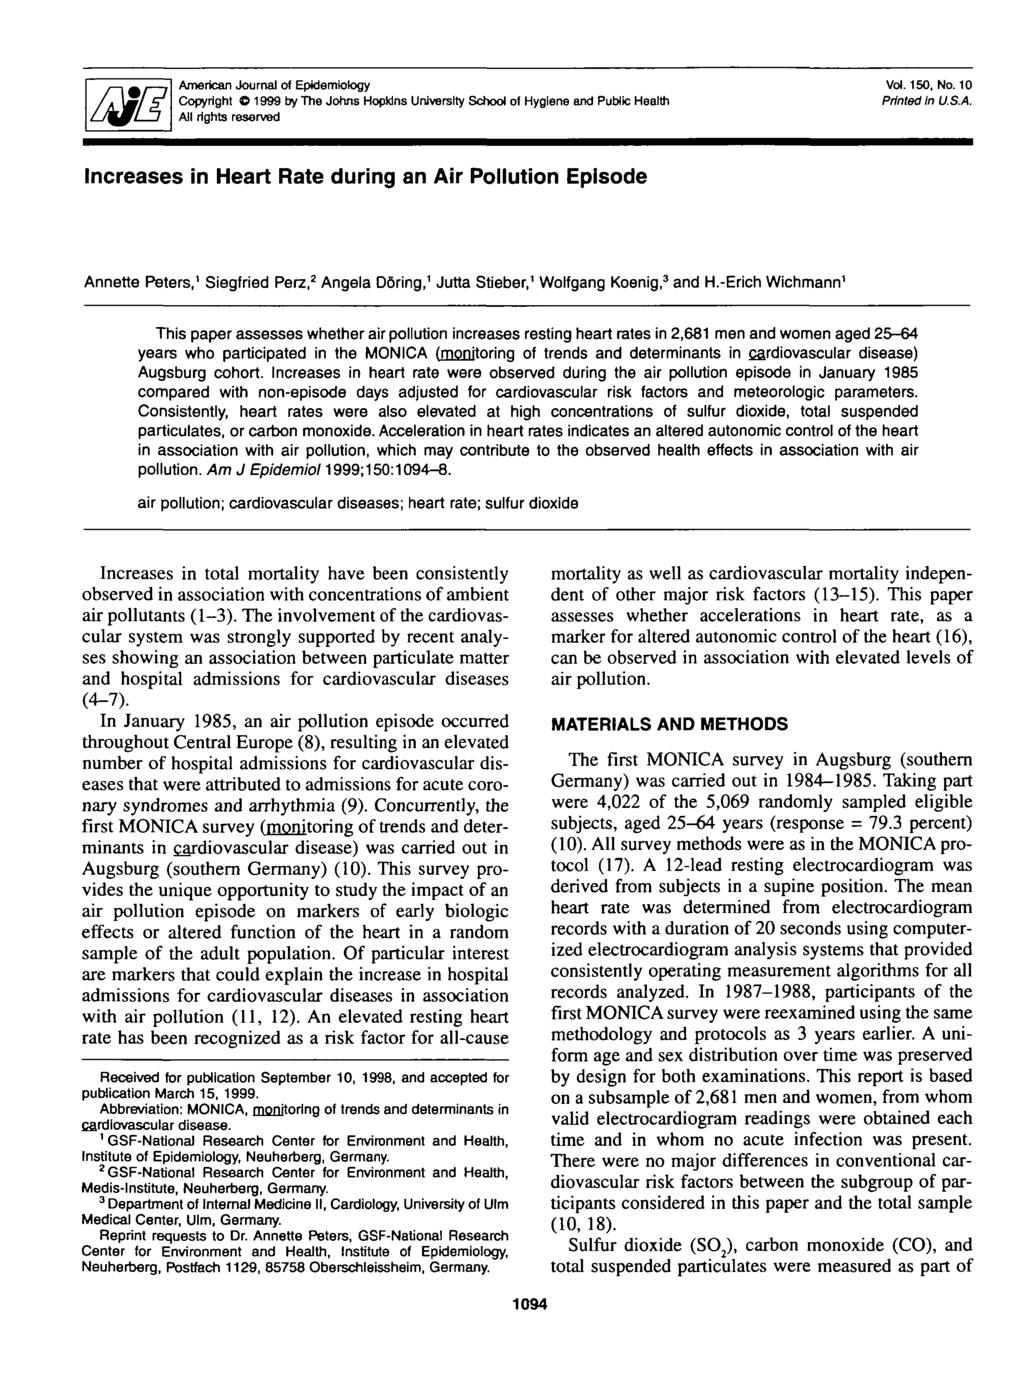 American Journal of Epidemiology Copyright 1999 by The Johns Hopkins University School of Hygiene and Public Health All rights reserved Vol. 150, 10 Printed In U.S.A. Increases in Rate during an Air Pollution Episode Annette Peters, 1 Siegfried Perz, 2 Angela Dfiring, 1 Jutta Stieber, 1 Wolfgang Koenig, 3 and H.